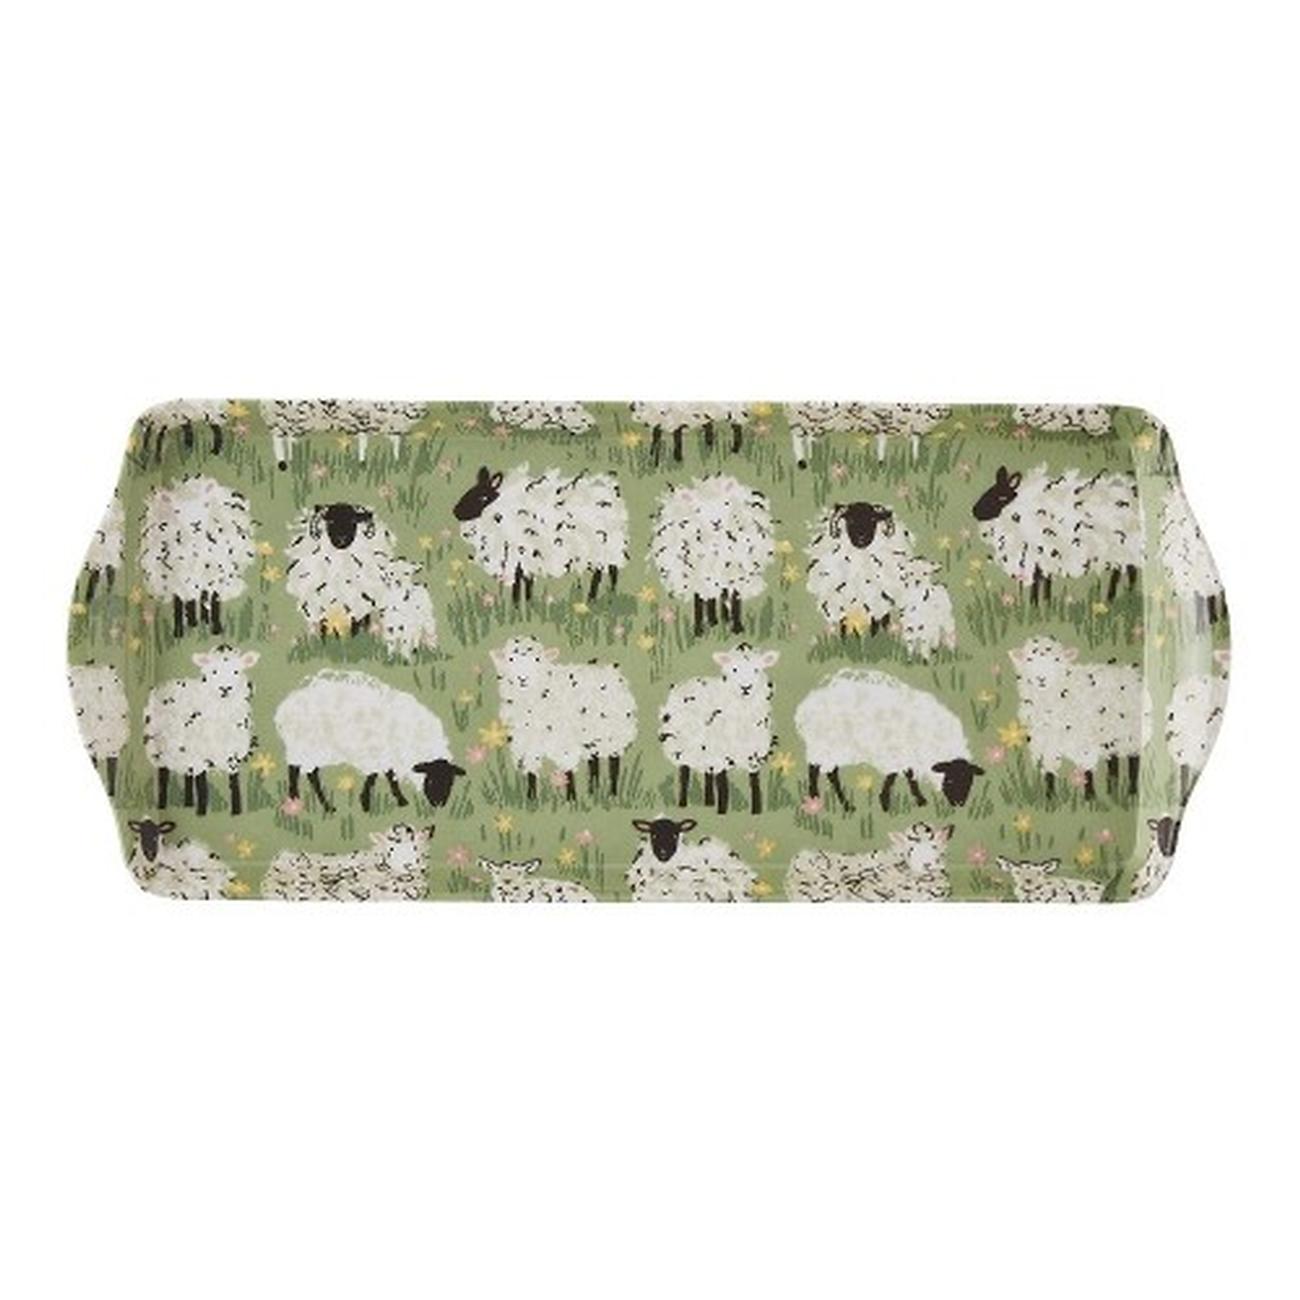 ulster-weavers-woolly-sheep-small-tray - Ulster Weavers Woolly Sheep Tray Small